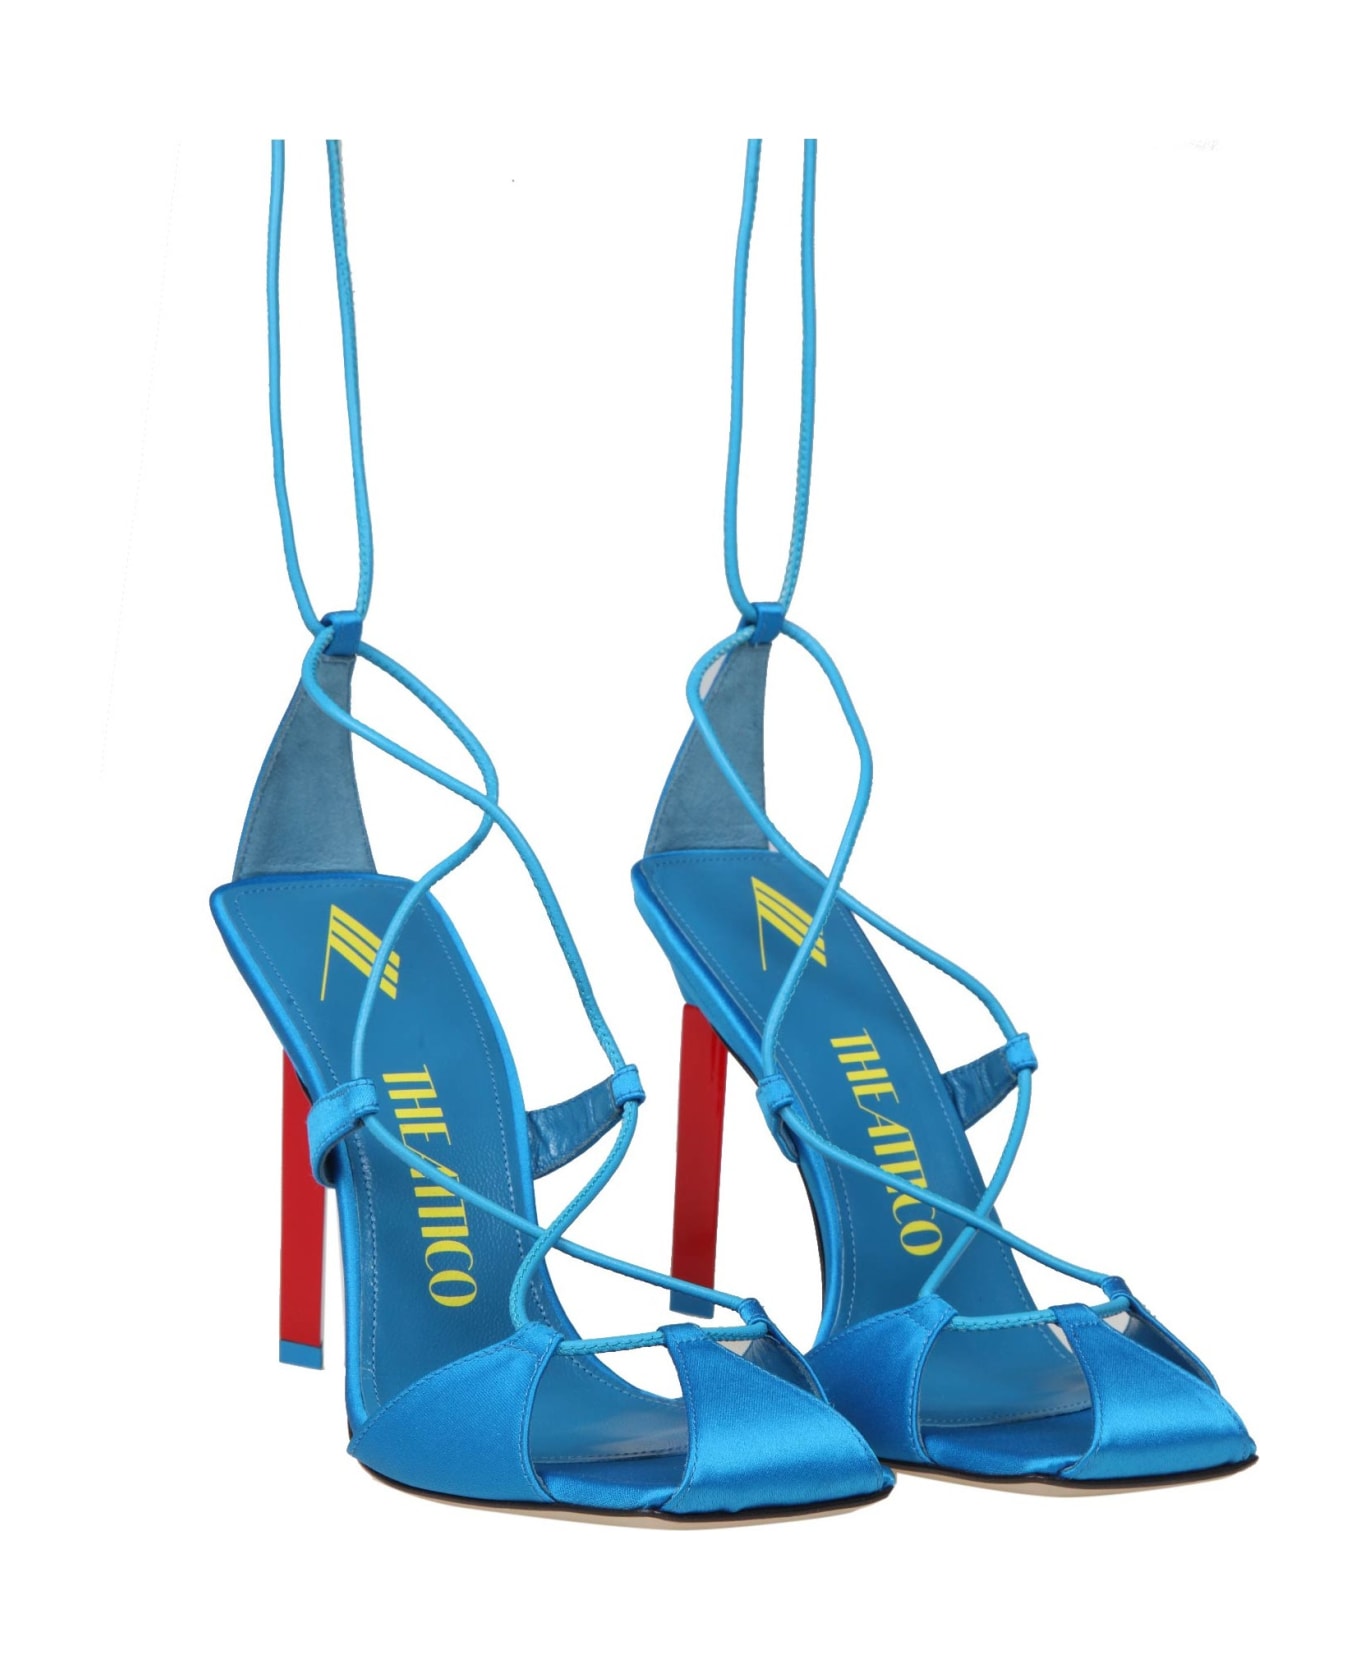 The Attico Adele Sandal In Turquoise Satin - Clear Blue